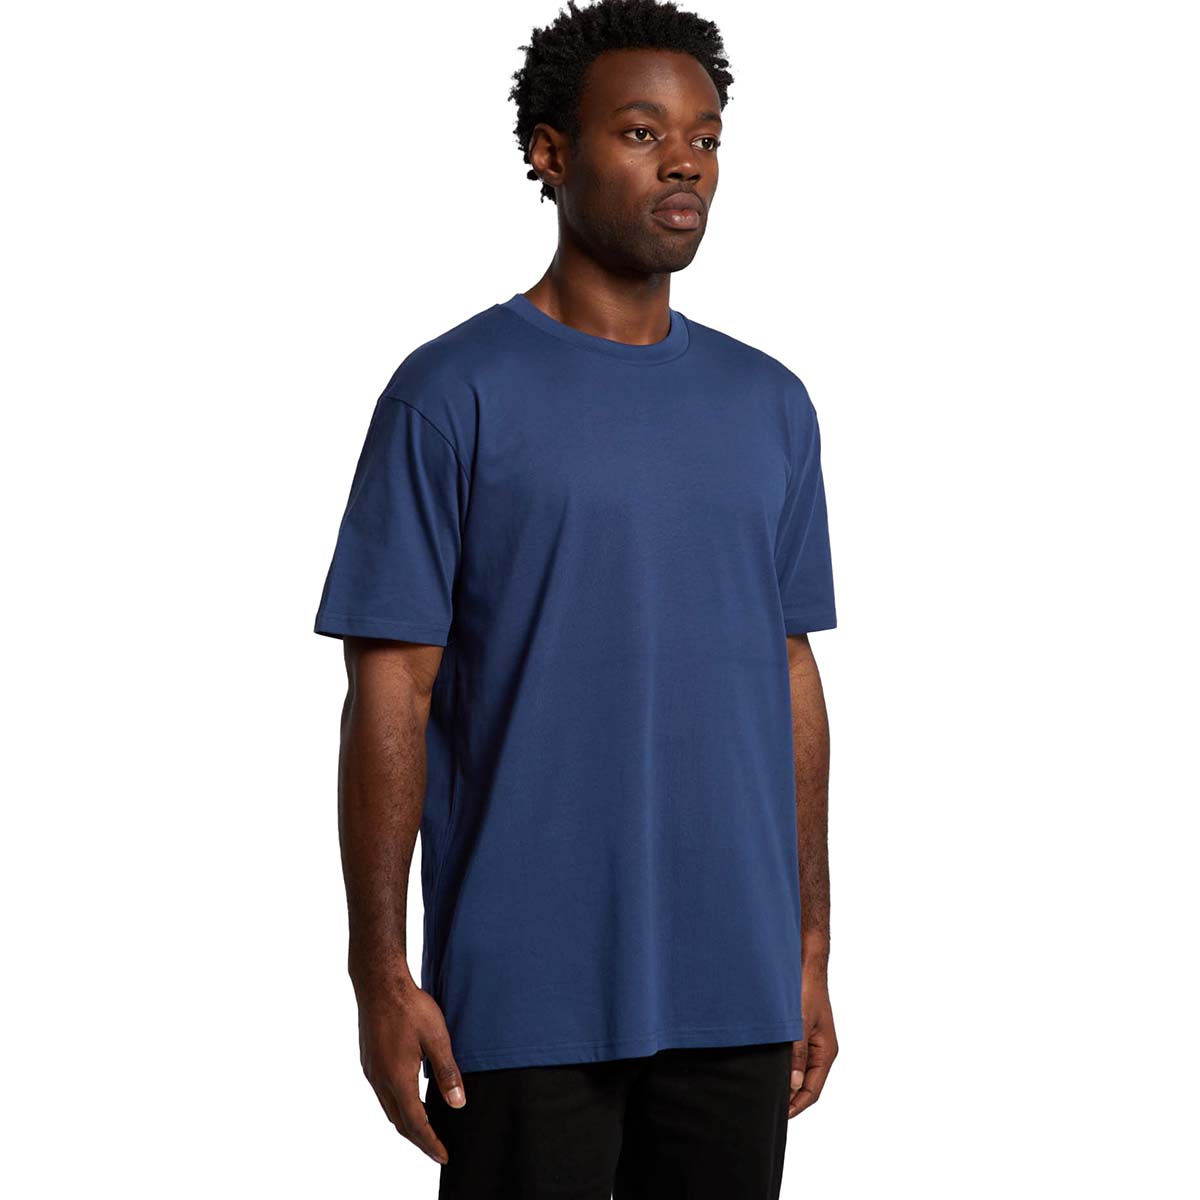 AS Colour Classic Tee - 5026 - Side Angle View